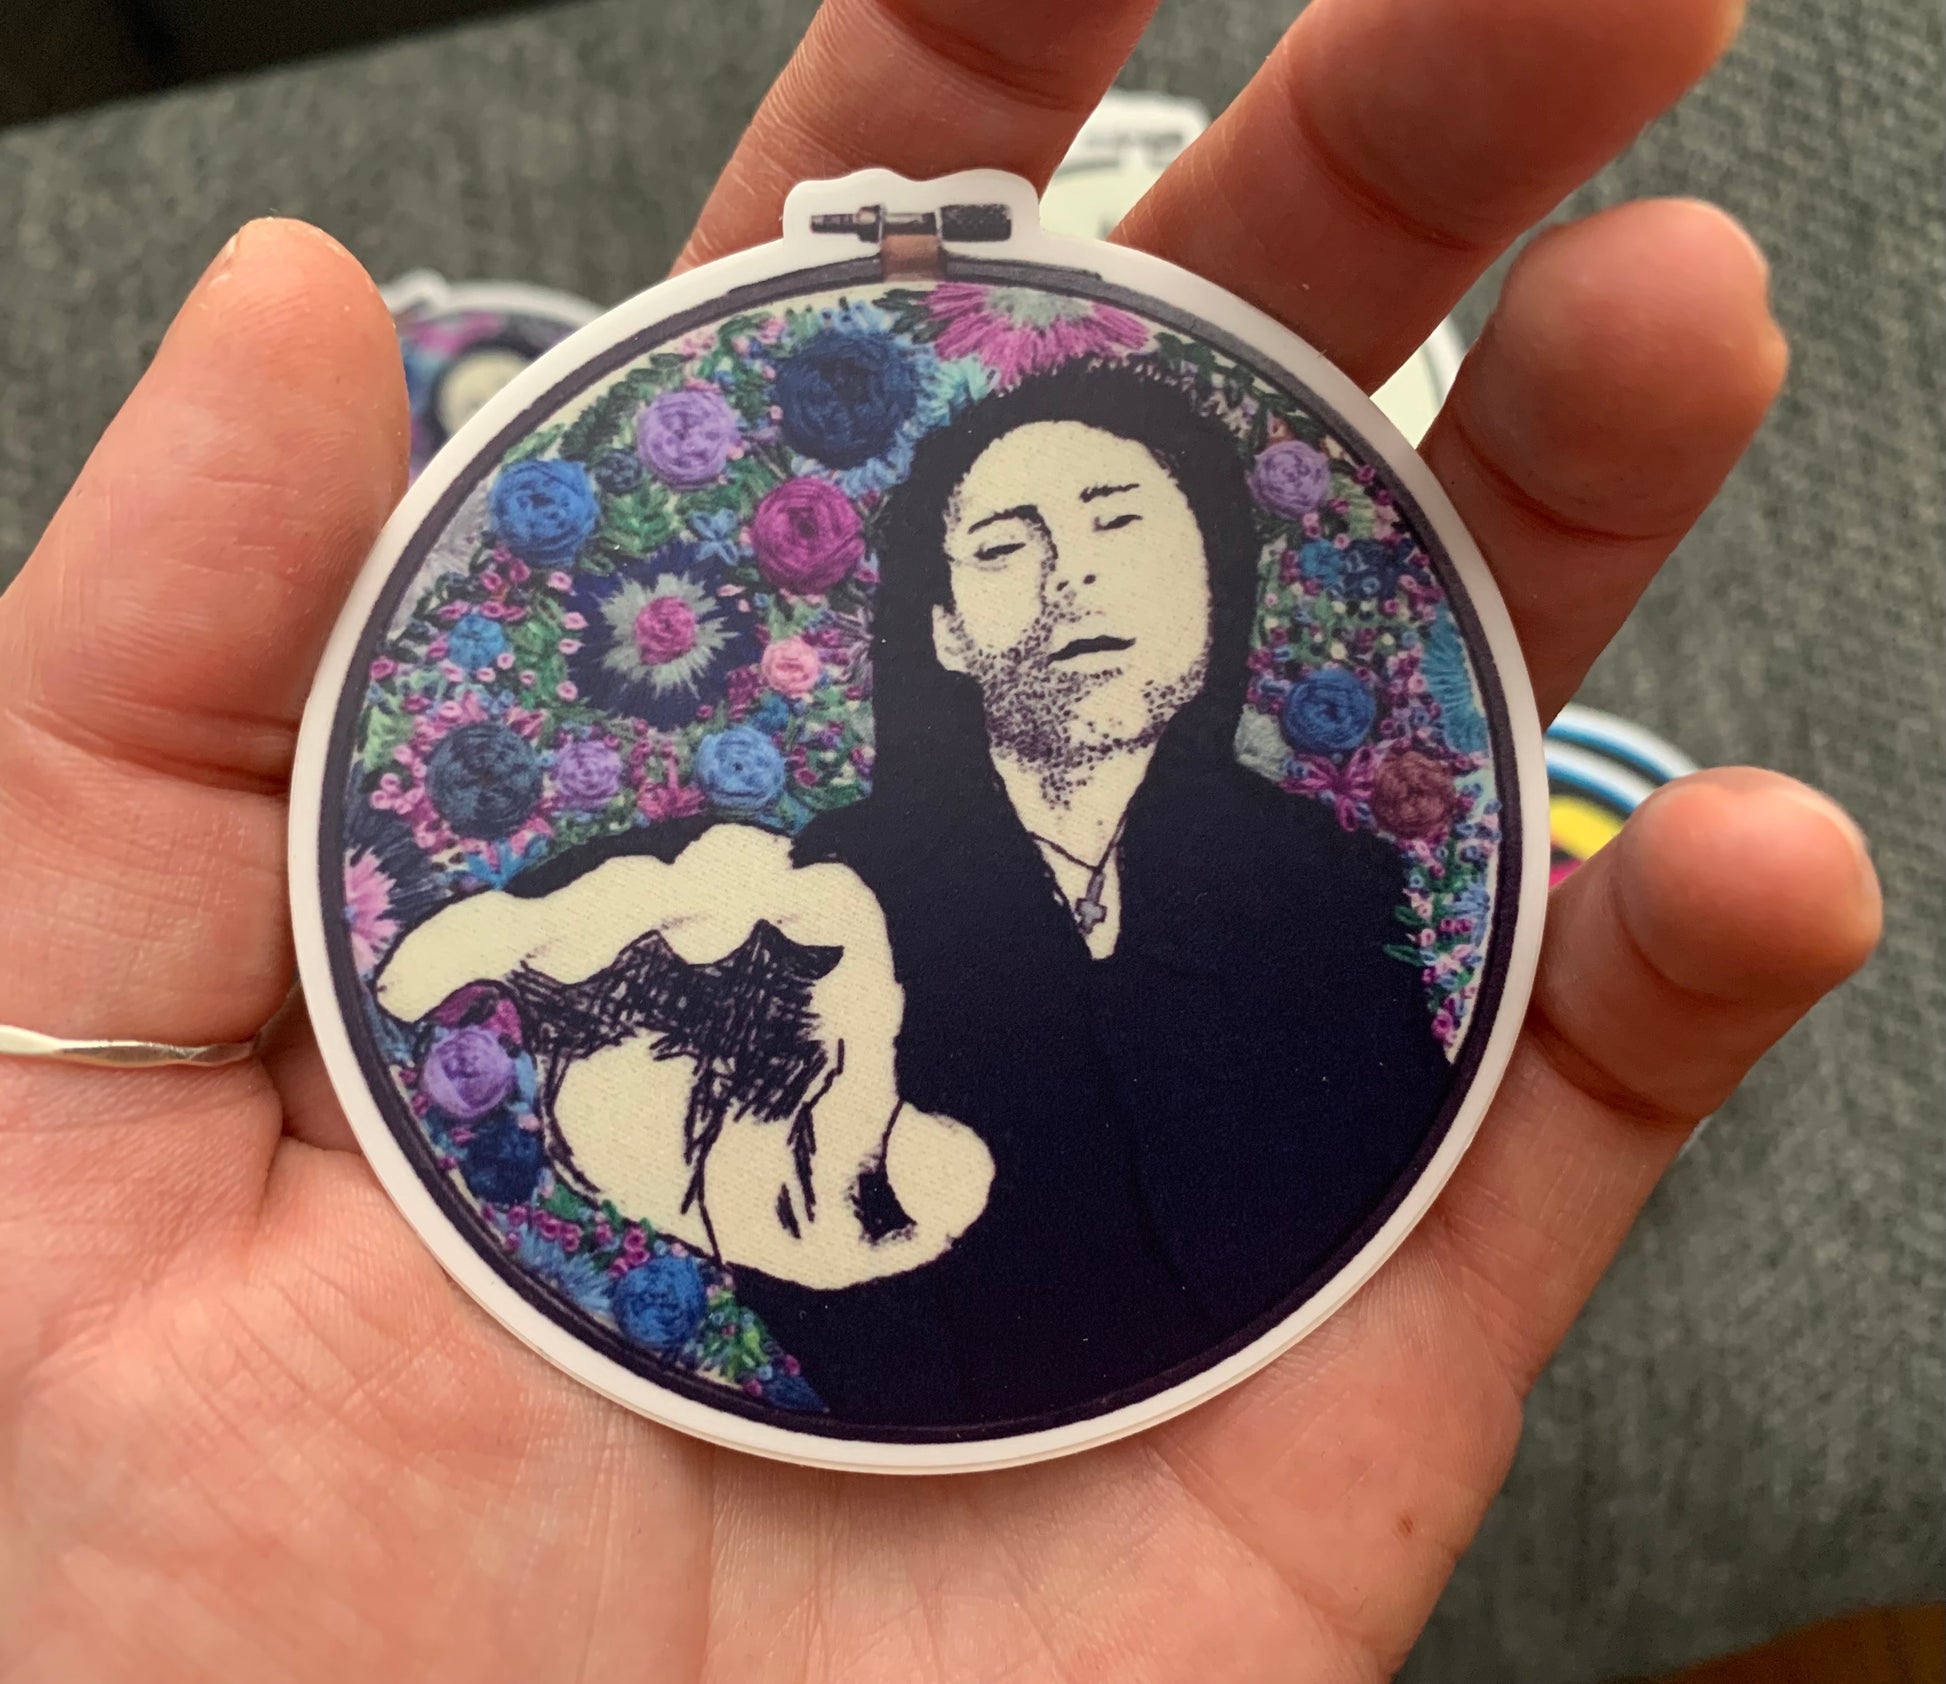 Davey Havok, reaching for the camera, in embroidery. with blue, purple flowers around him, embroidered. Embroidery hoop sticker design by me. AFI